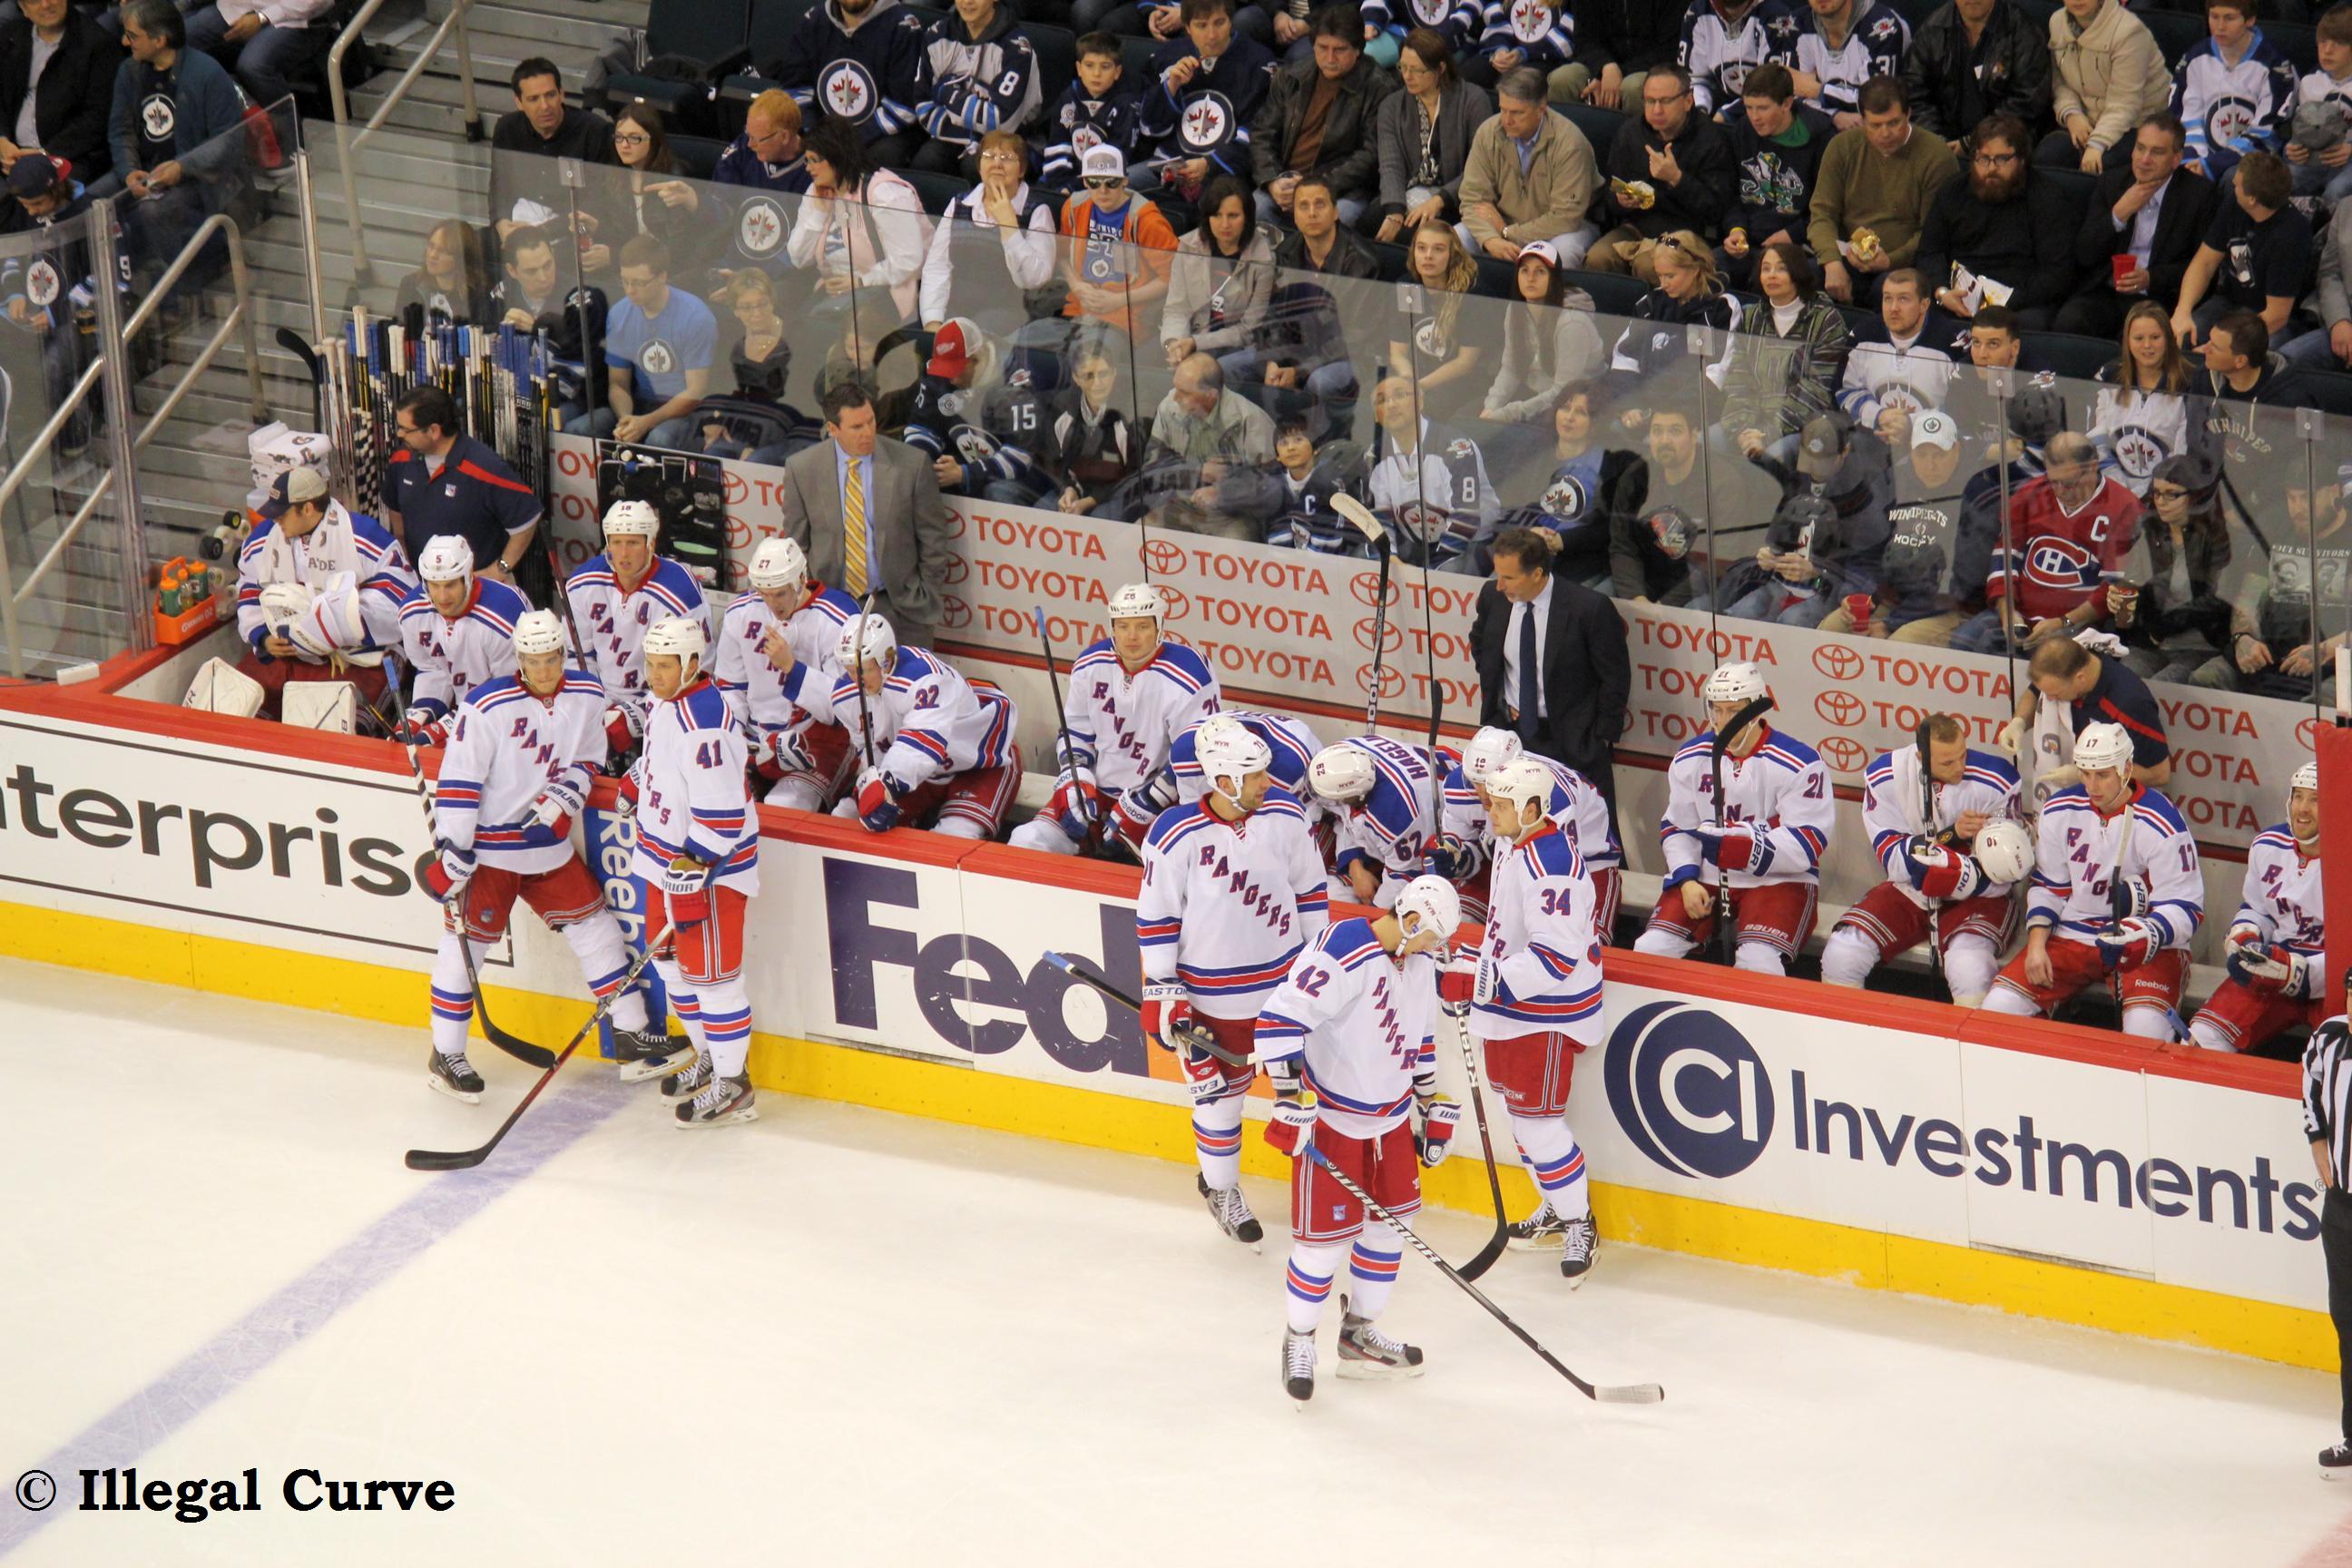 Rangers bench March 28